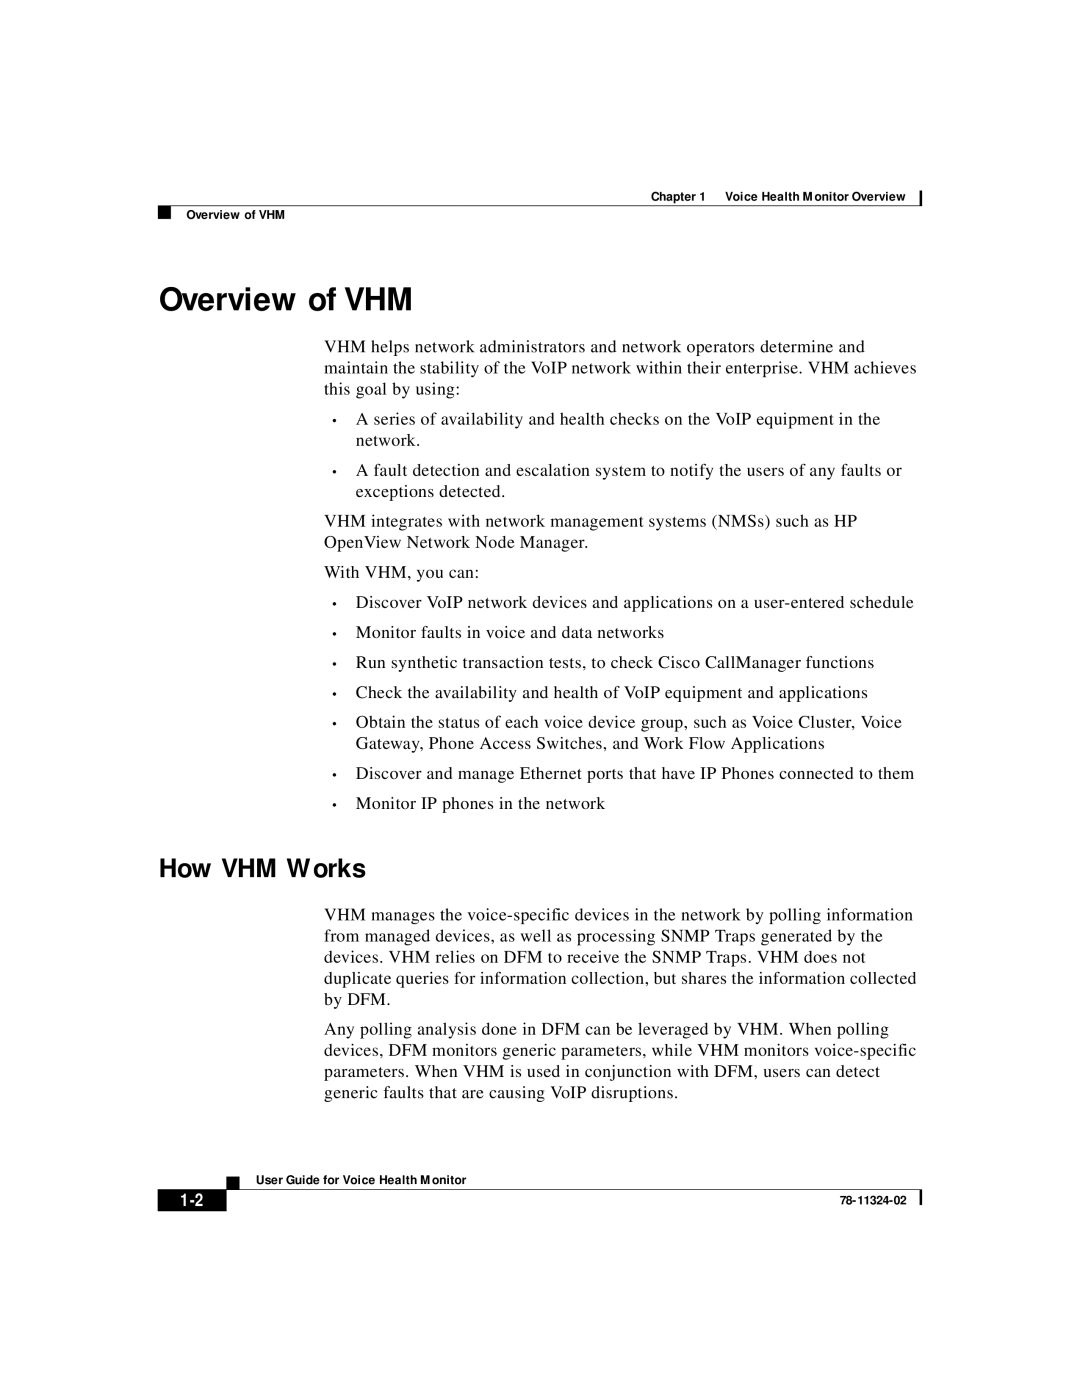 Cisco Systems 78-11324-02 manual Overview of VHM, How VHM Works 